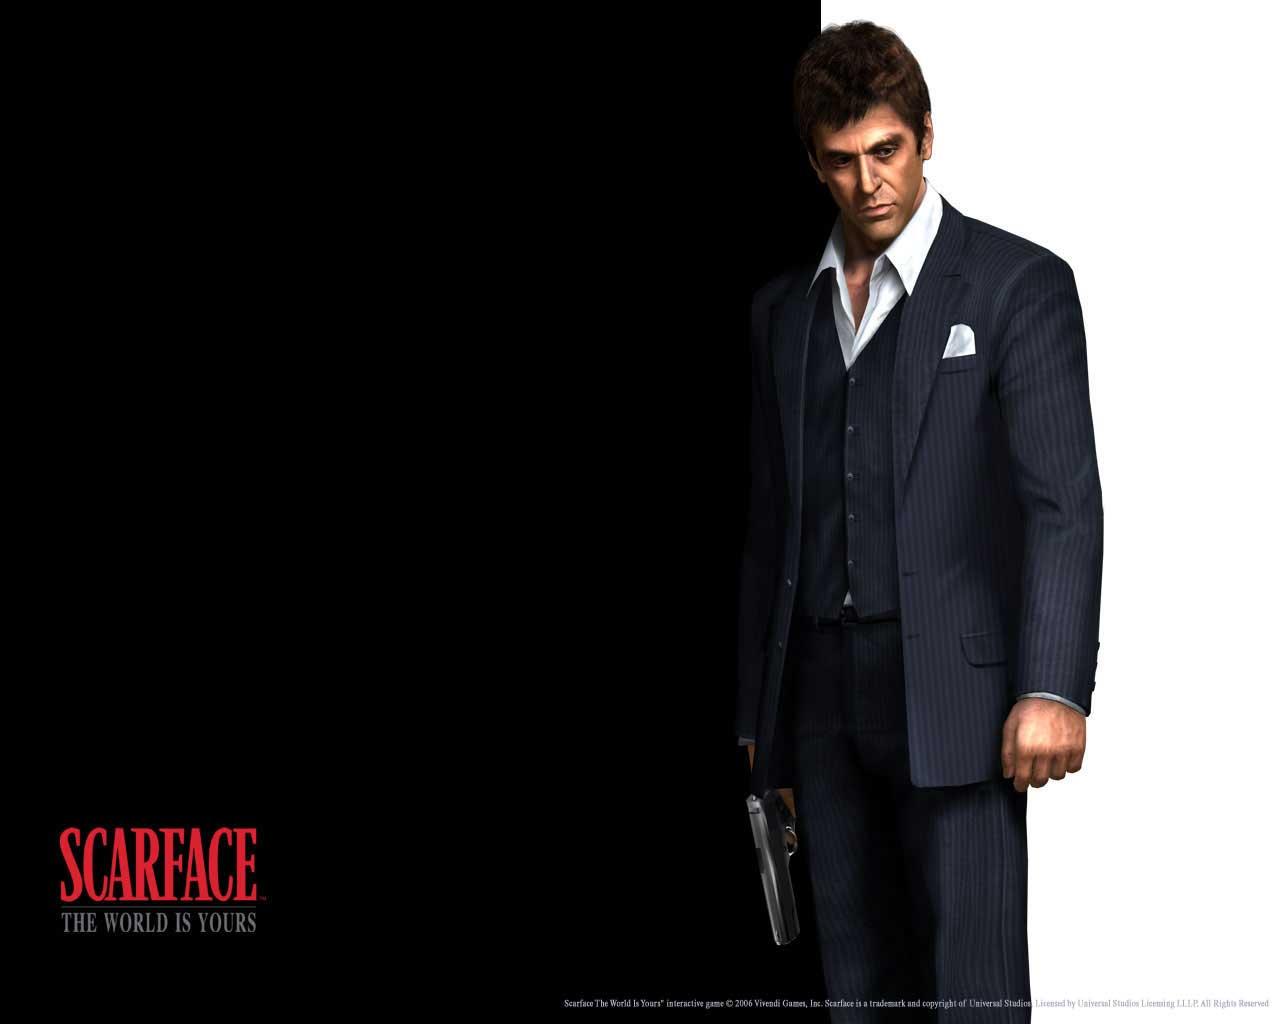 Scarface The World is Yours Wallpaper. HD Wallpaper Base